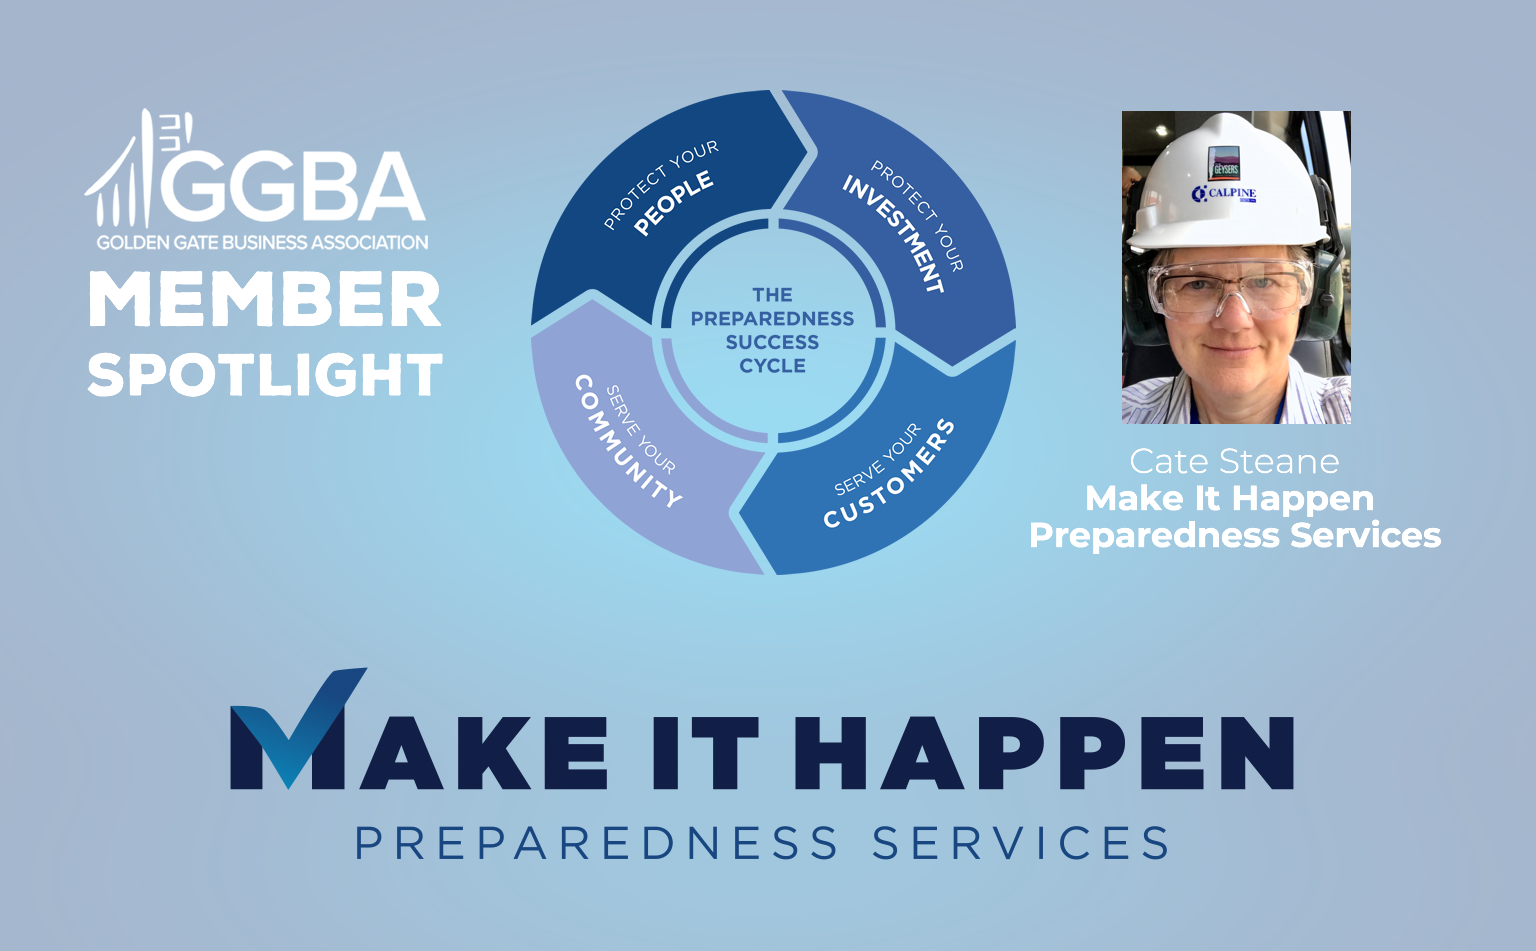 You are currently viewing Cate Steane of Make It Happen Preparedness Services